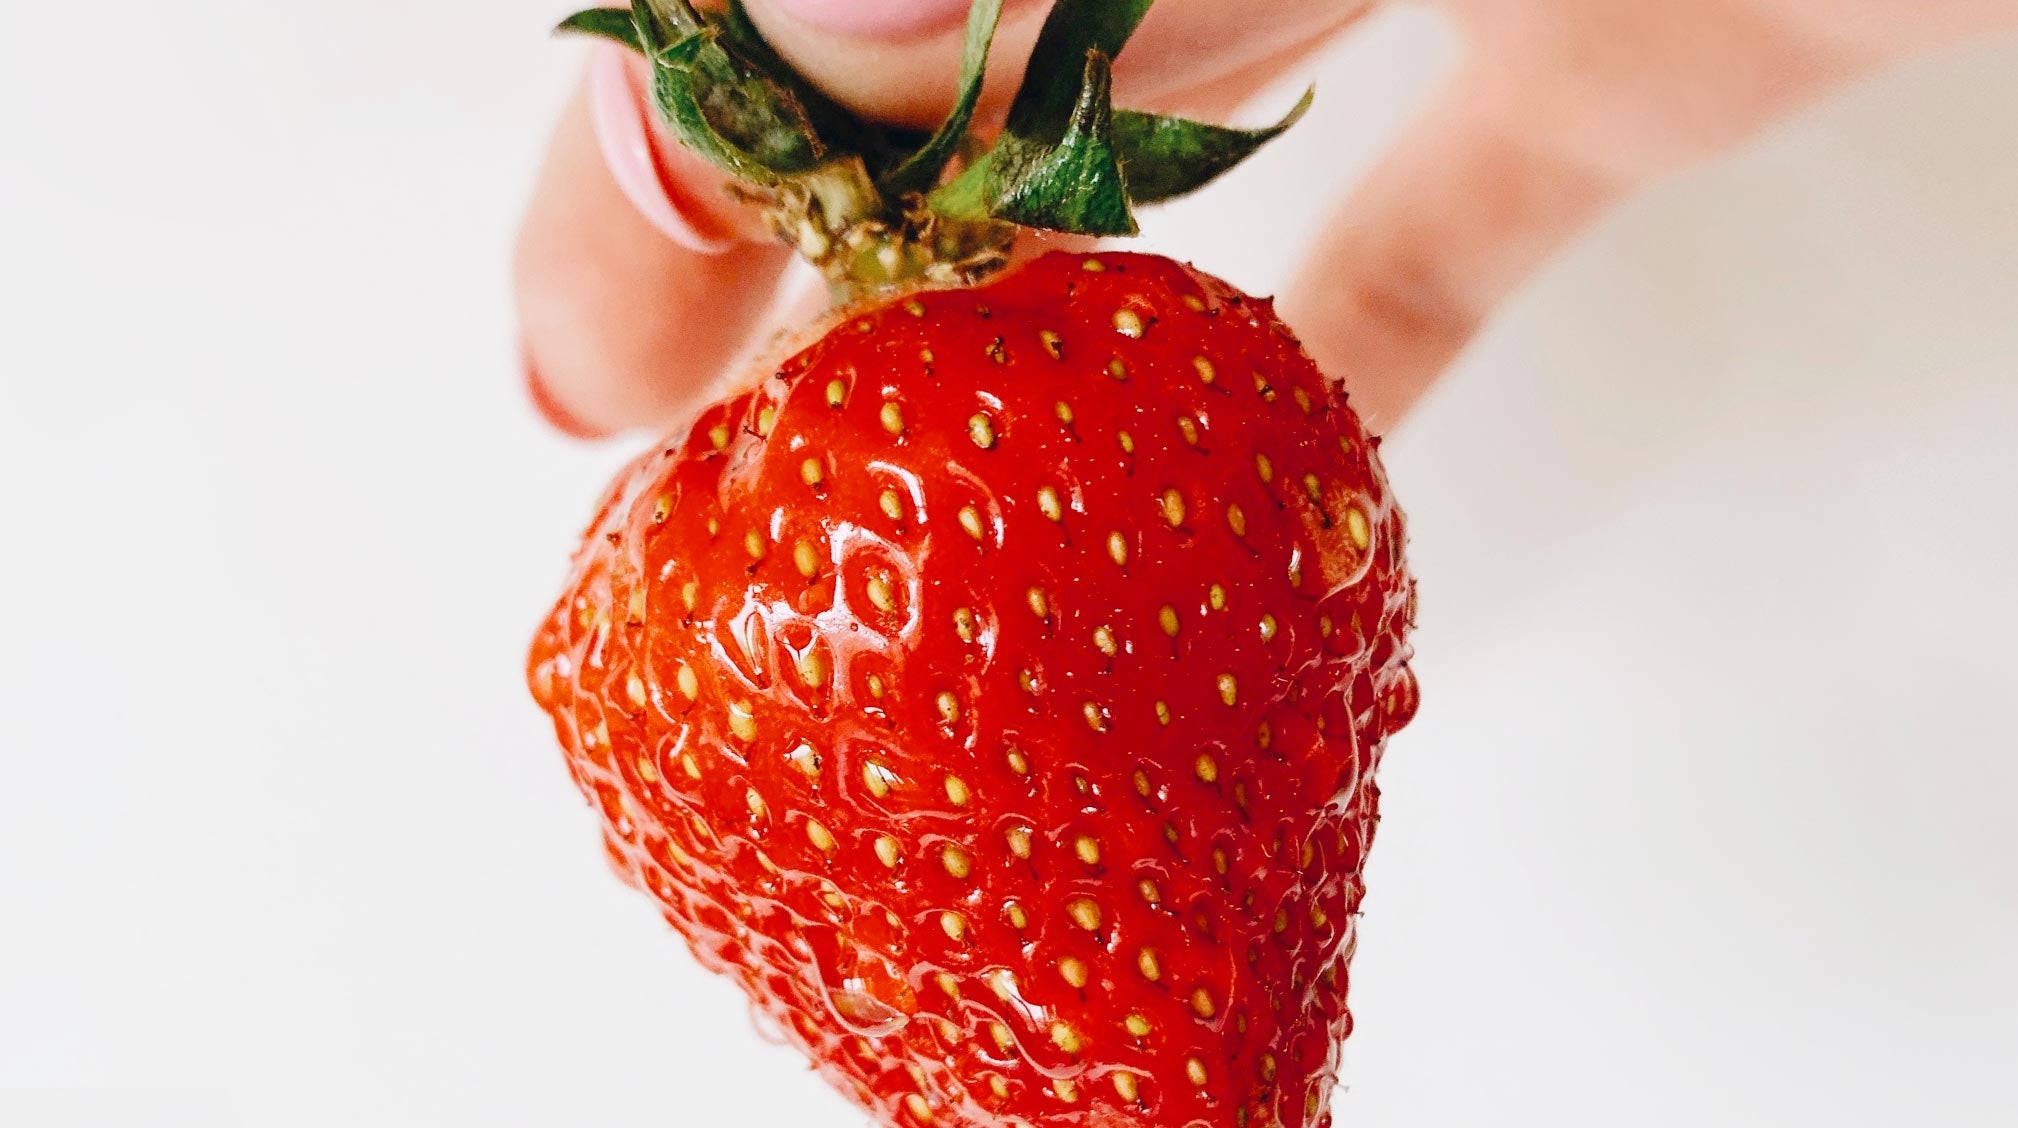 How to Get Rid of Strawberry Legs, According to Dermatologists